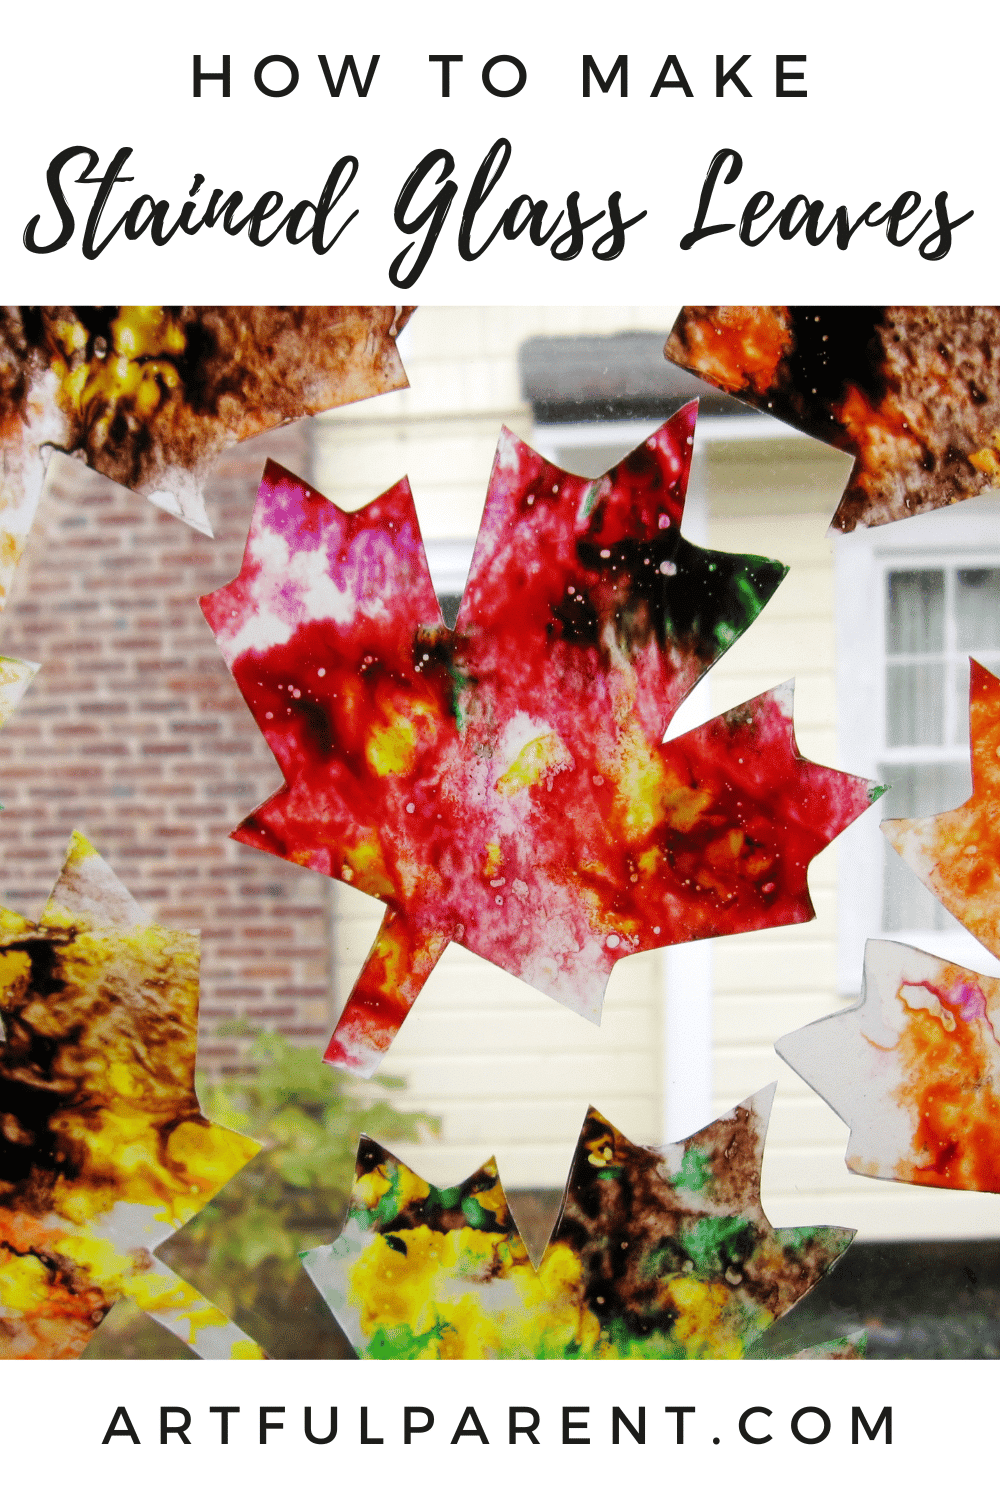 How to Make Stained Glass Leaves for Kids